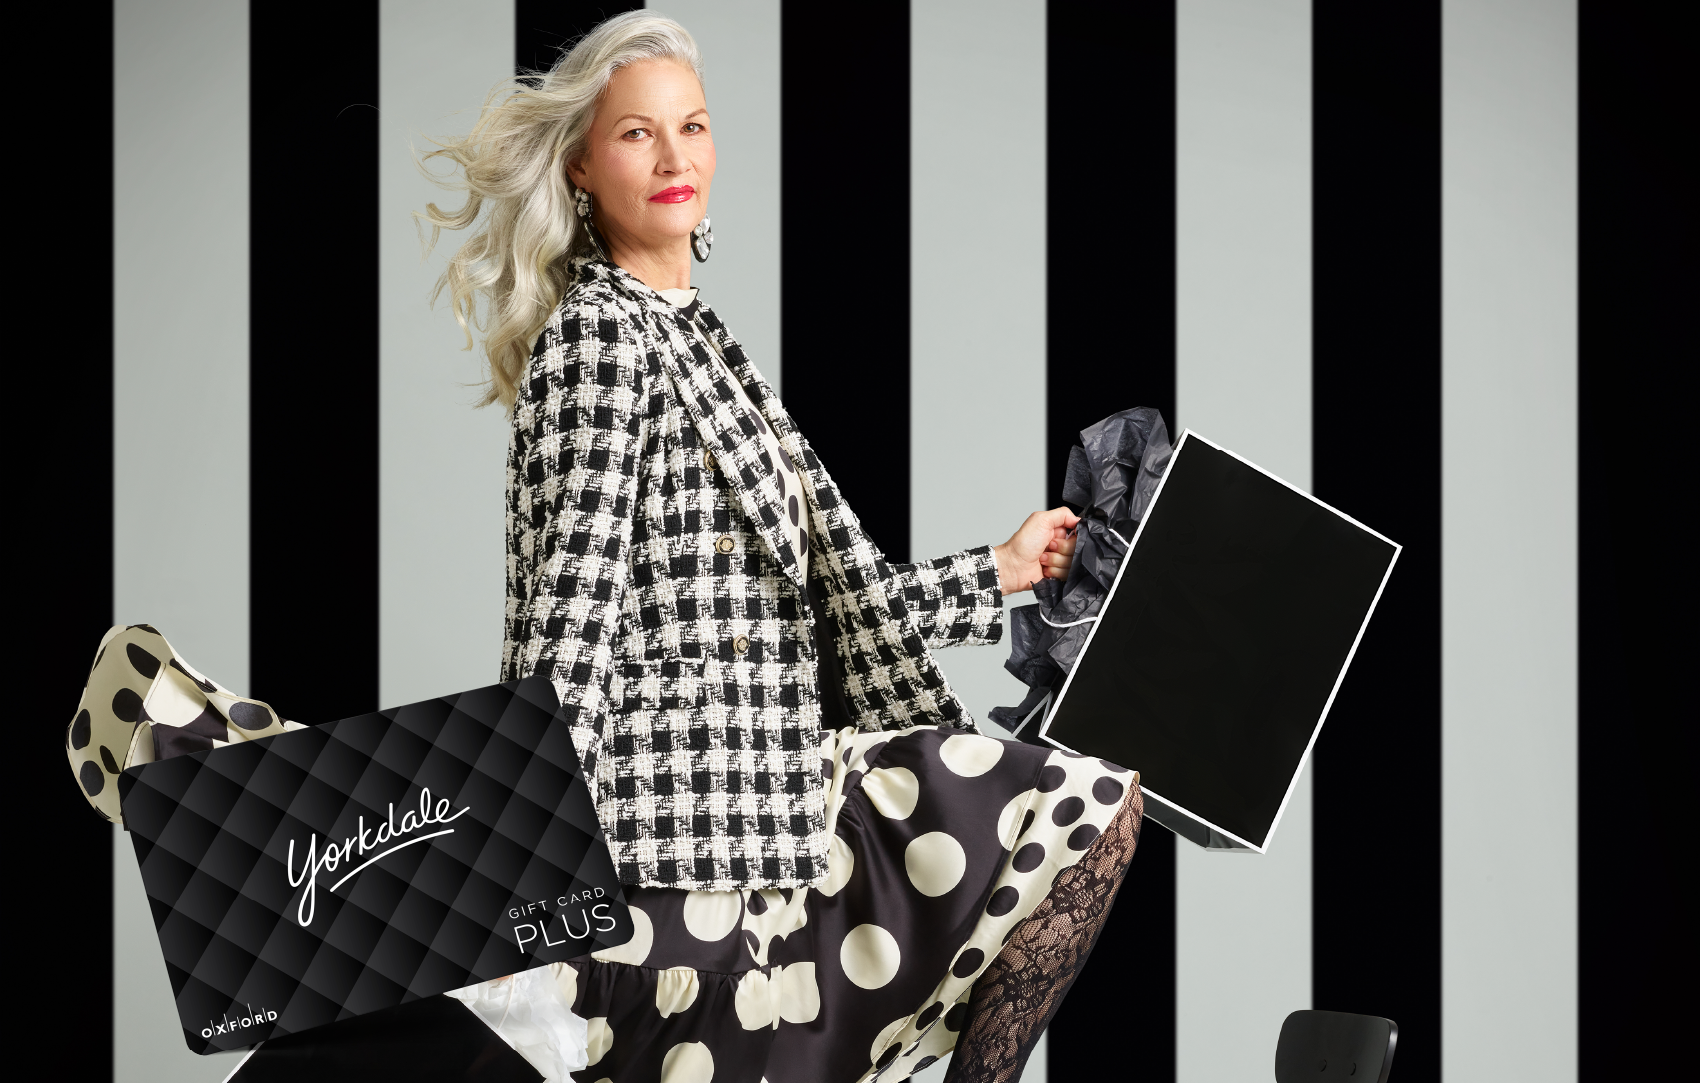 promotional image for a Yorkdale gift card. It shows a woman wearing a black and white houndstooth blazer and black and white polka dot skirt holding black and white shopping bags. A Yorkdale gift card is also in the image